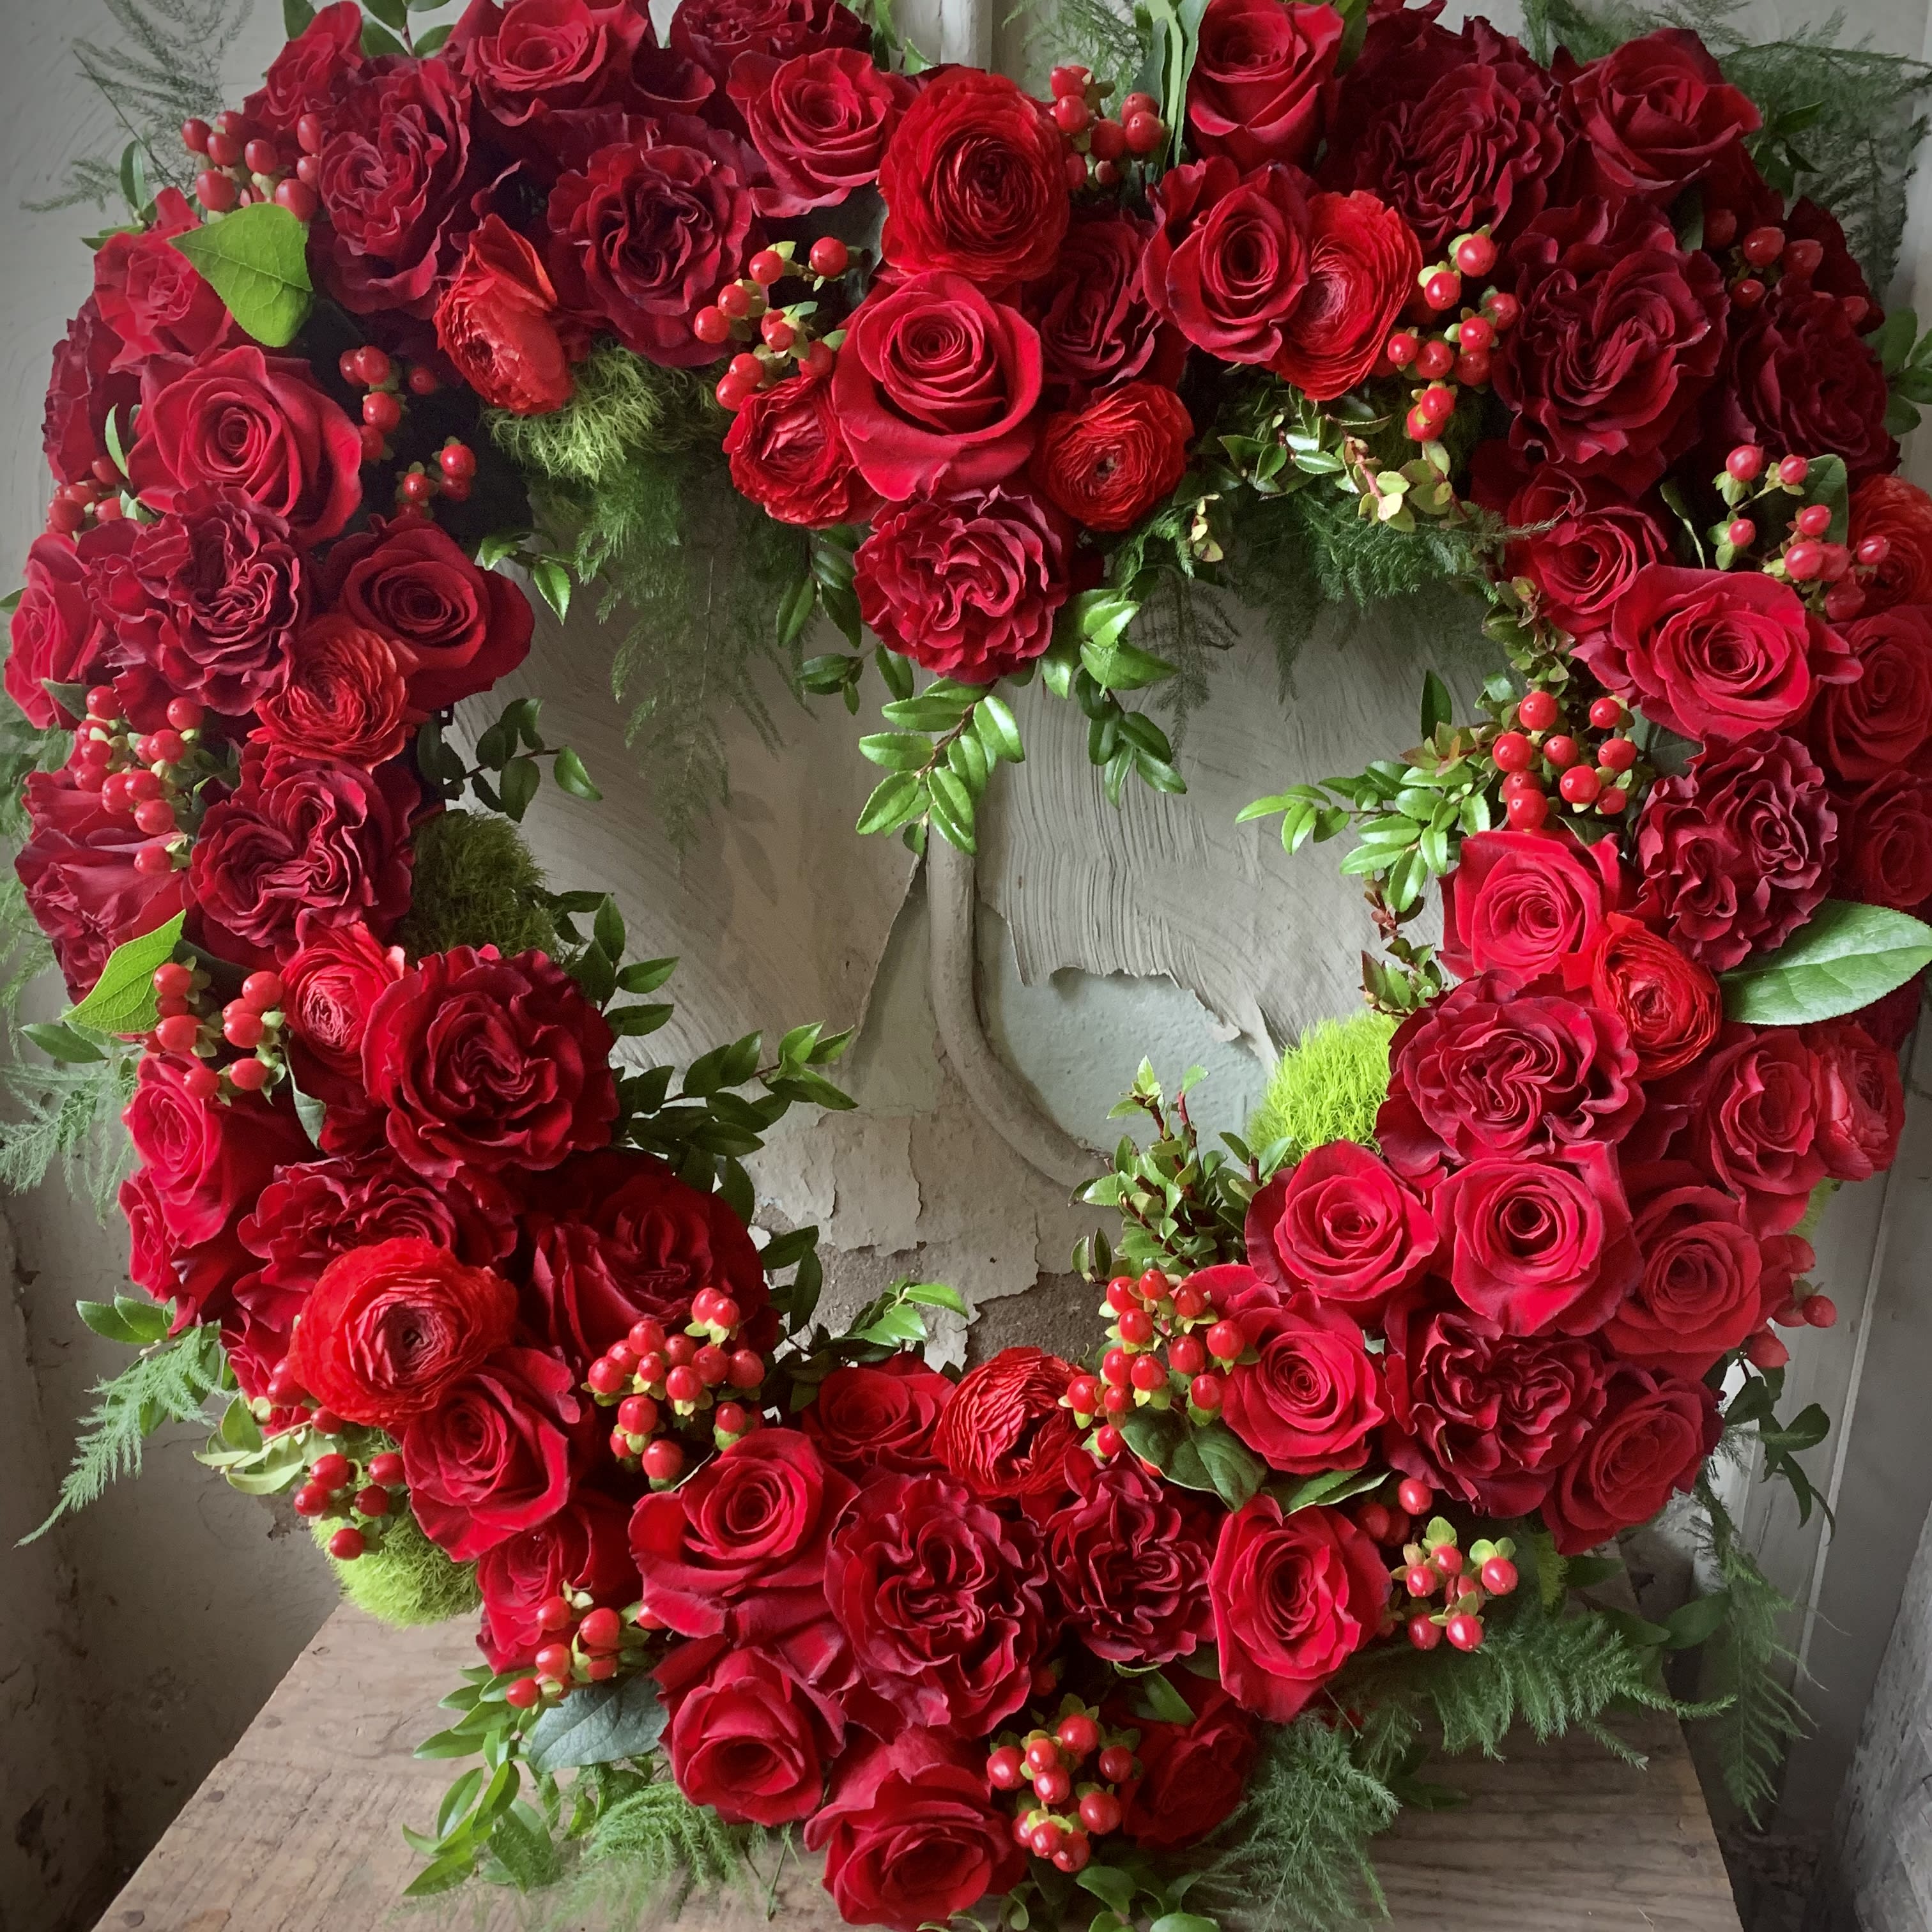 Endless Love - Shown as a 20” open heart, Deluxe size is 22” open heart, Premium is 24” open heart. Deluxe and Premium sizes include higher stem count per size as well as more premium stems (garden roses, ranunculus vs standard roses. 